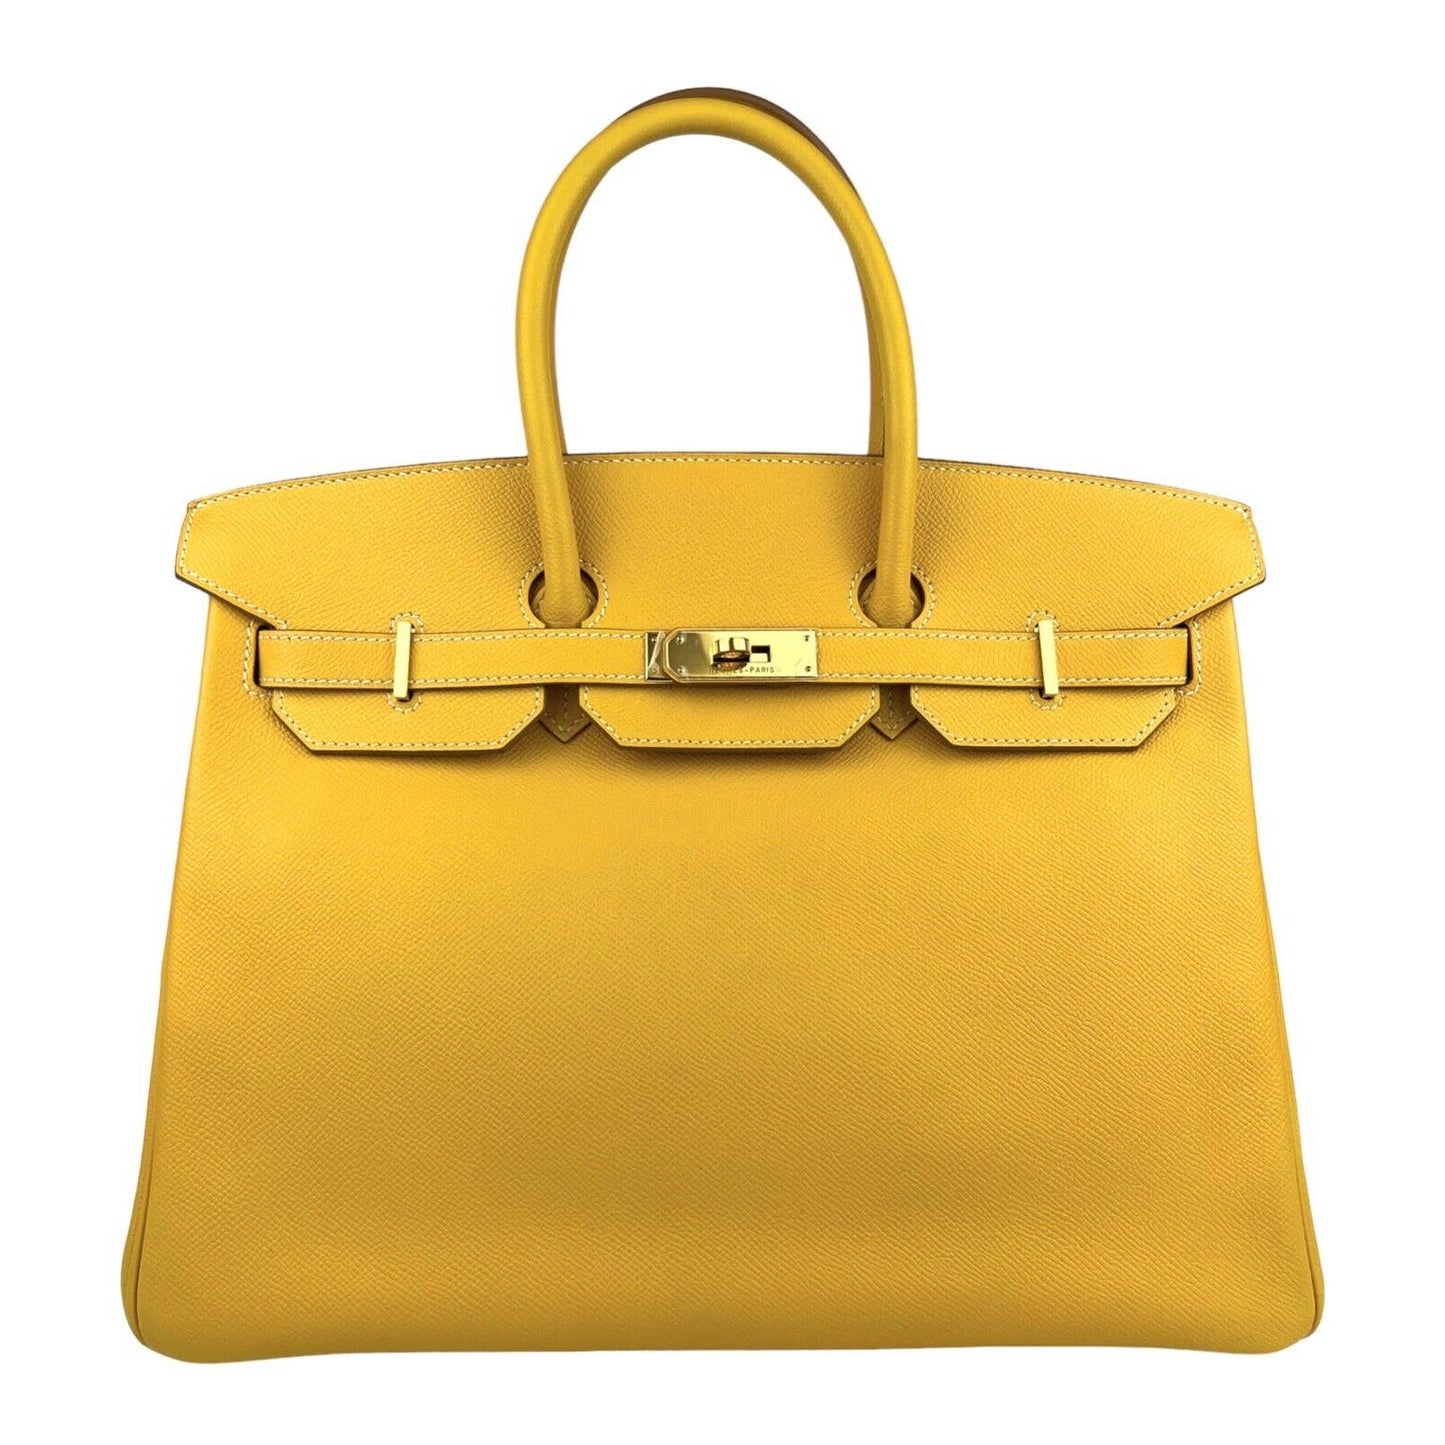 Hermes Birkin 35 Candy Yellow Gris Gary Epsom Leather Gold Hardware